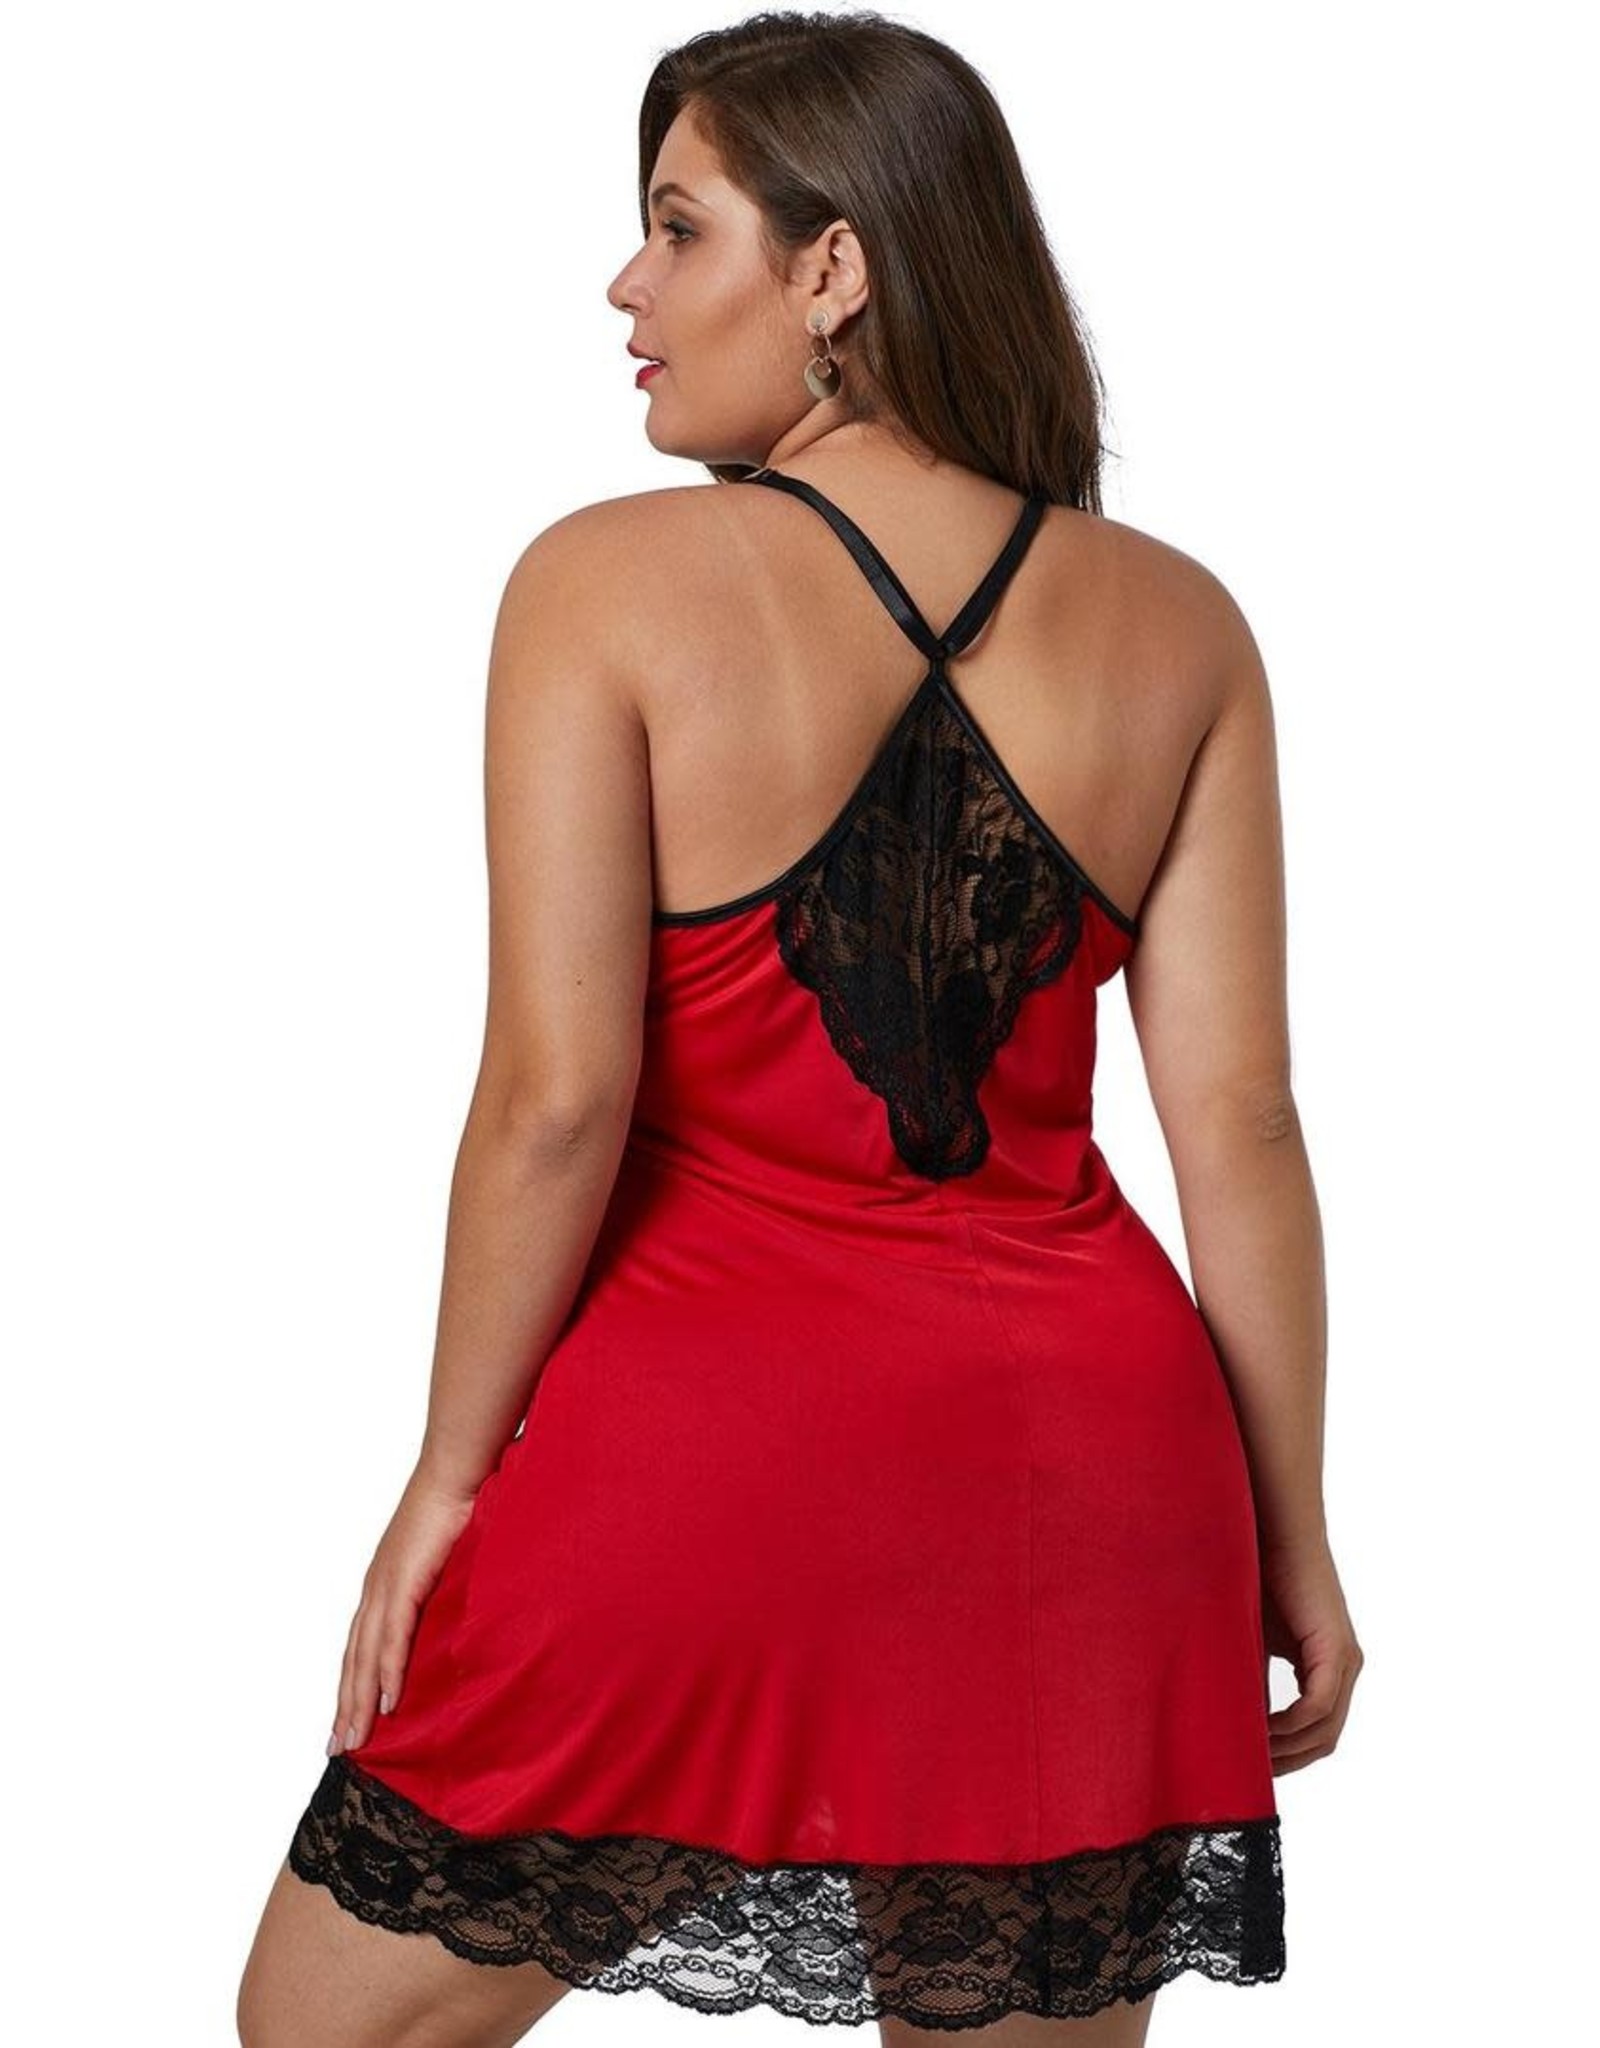 RED VENECIA CHEMISE WITH LACE TRIM - (US 22-24)3X